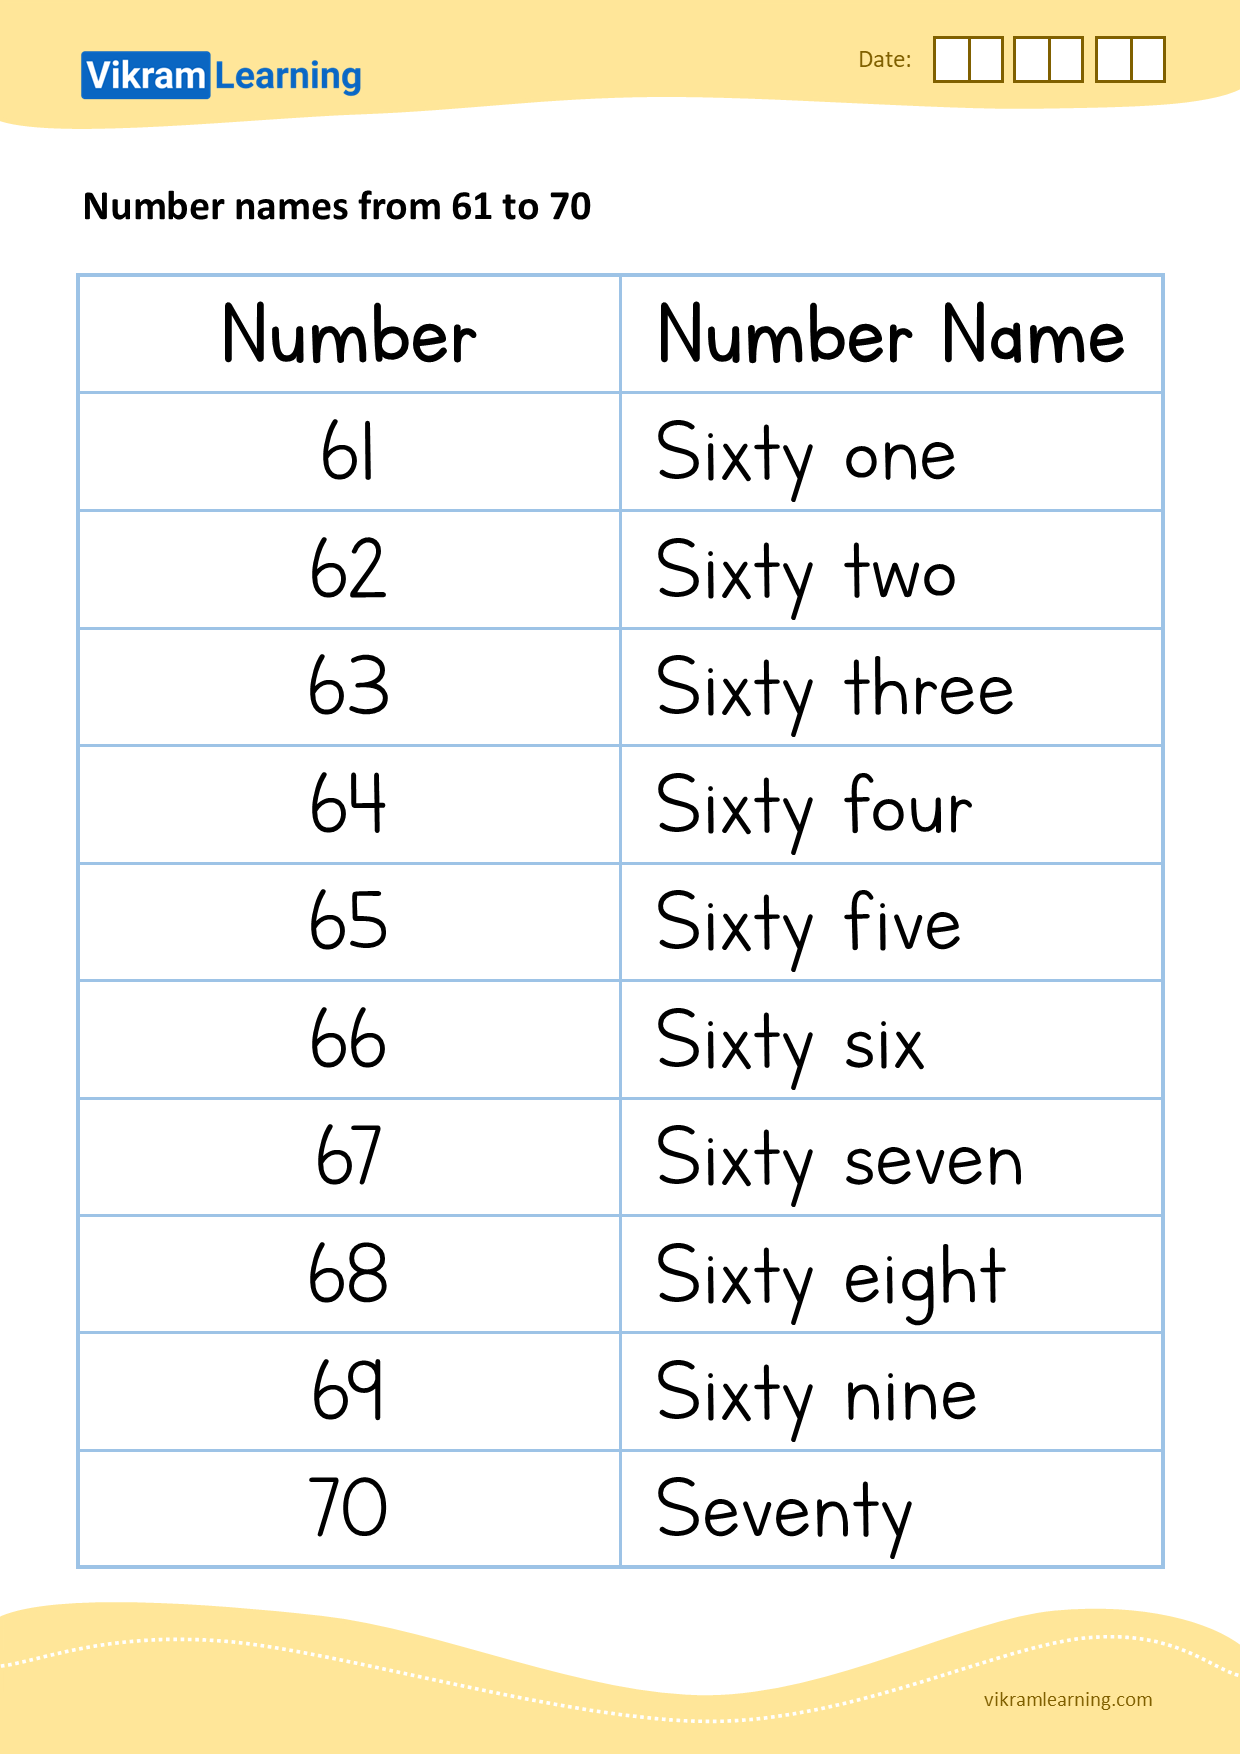 download-number-names-from-61-to-70-worksheets-vikramlearning